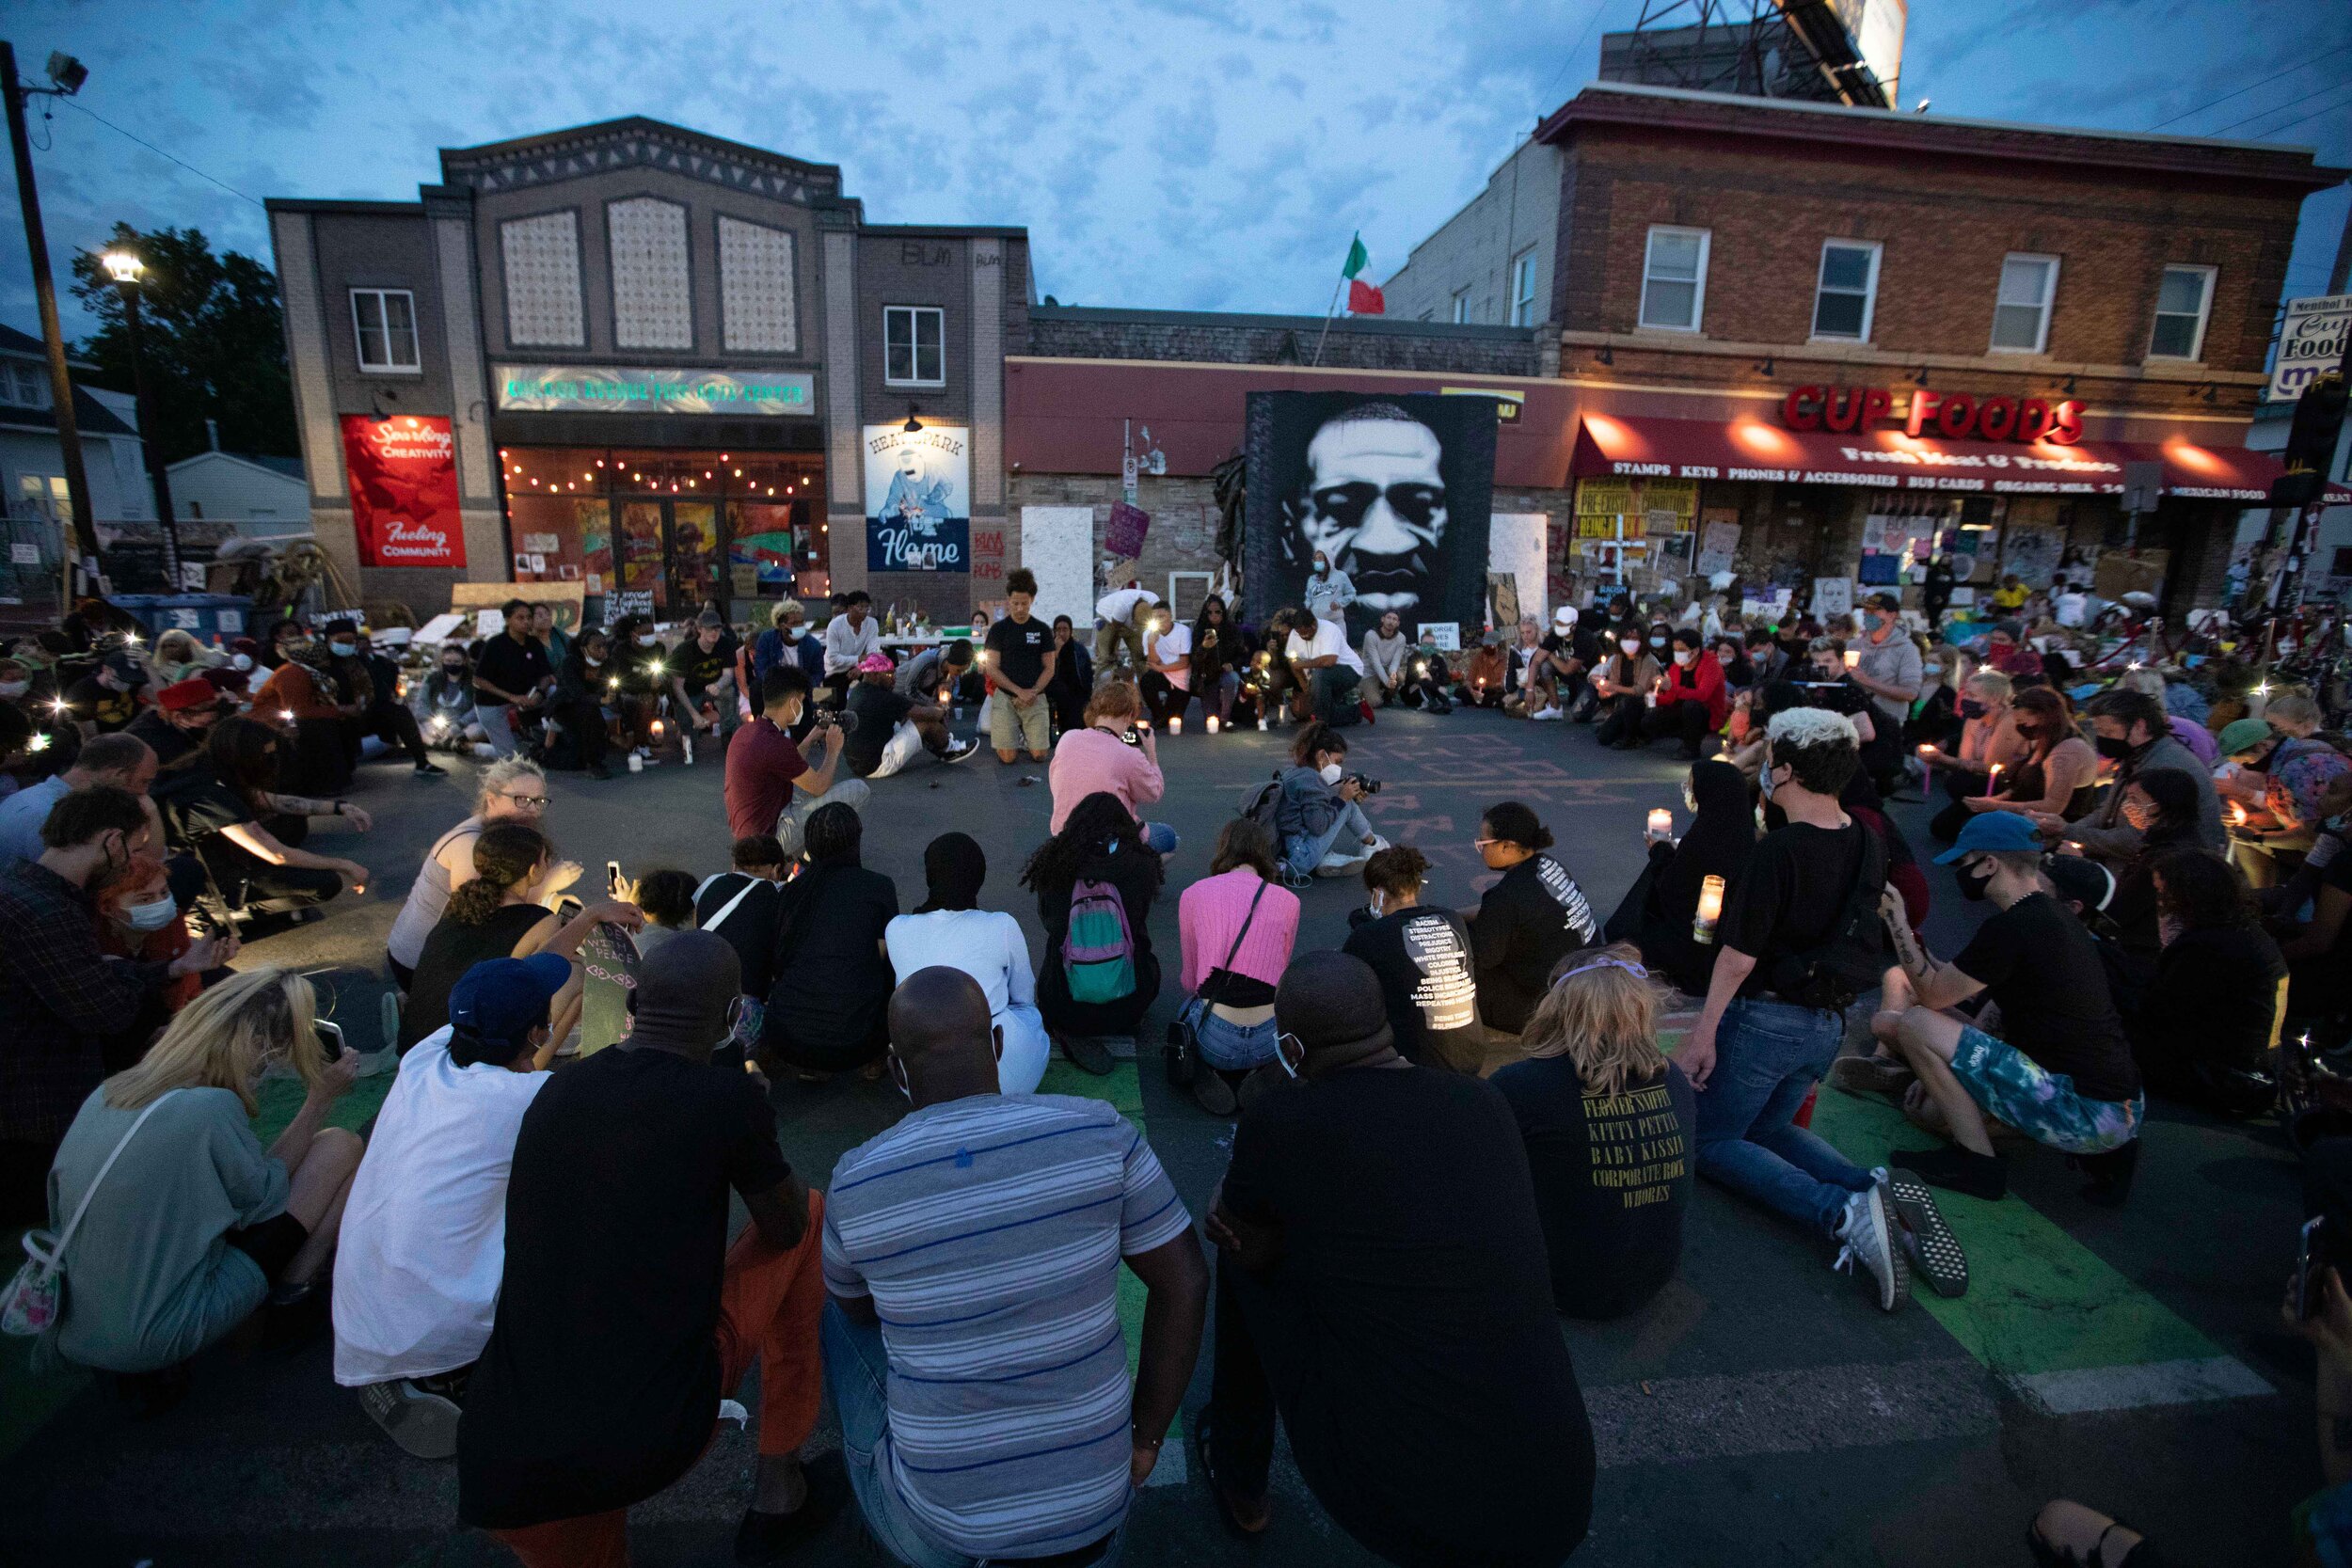  Community members take a knee for 8 minutes and 46 seconds in front of the George Floyd memorial in Minneapolis, Minnesota on Jun 14, 2020. 